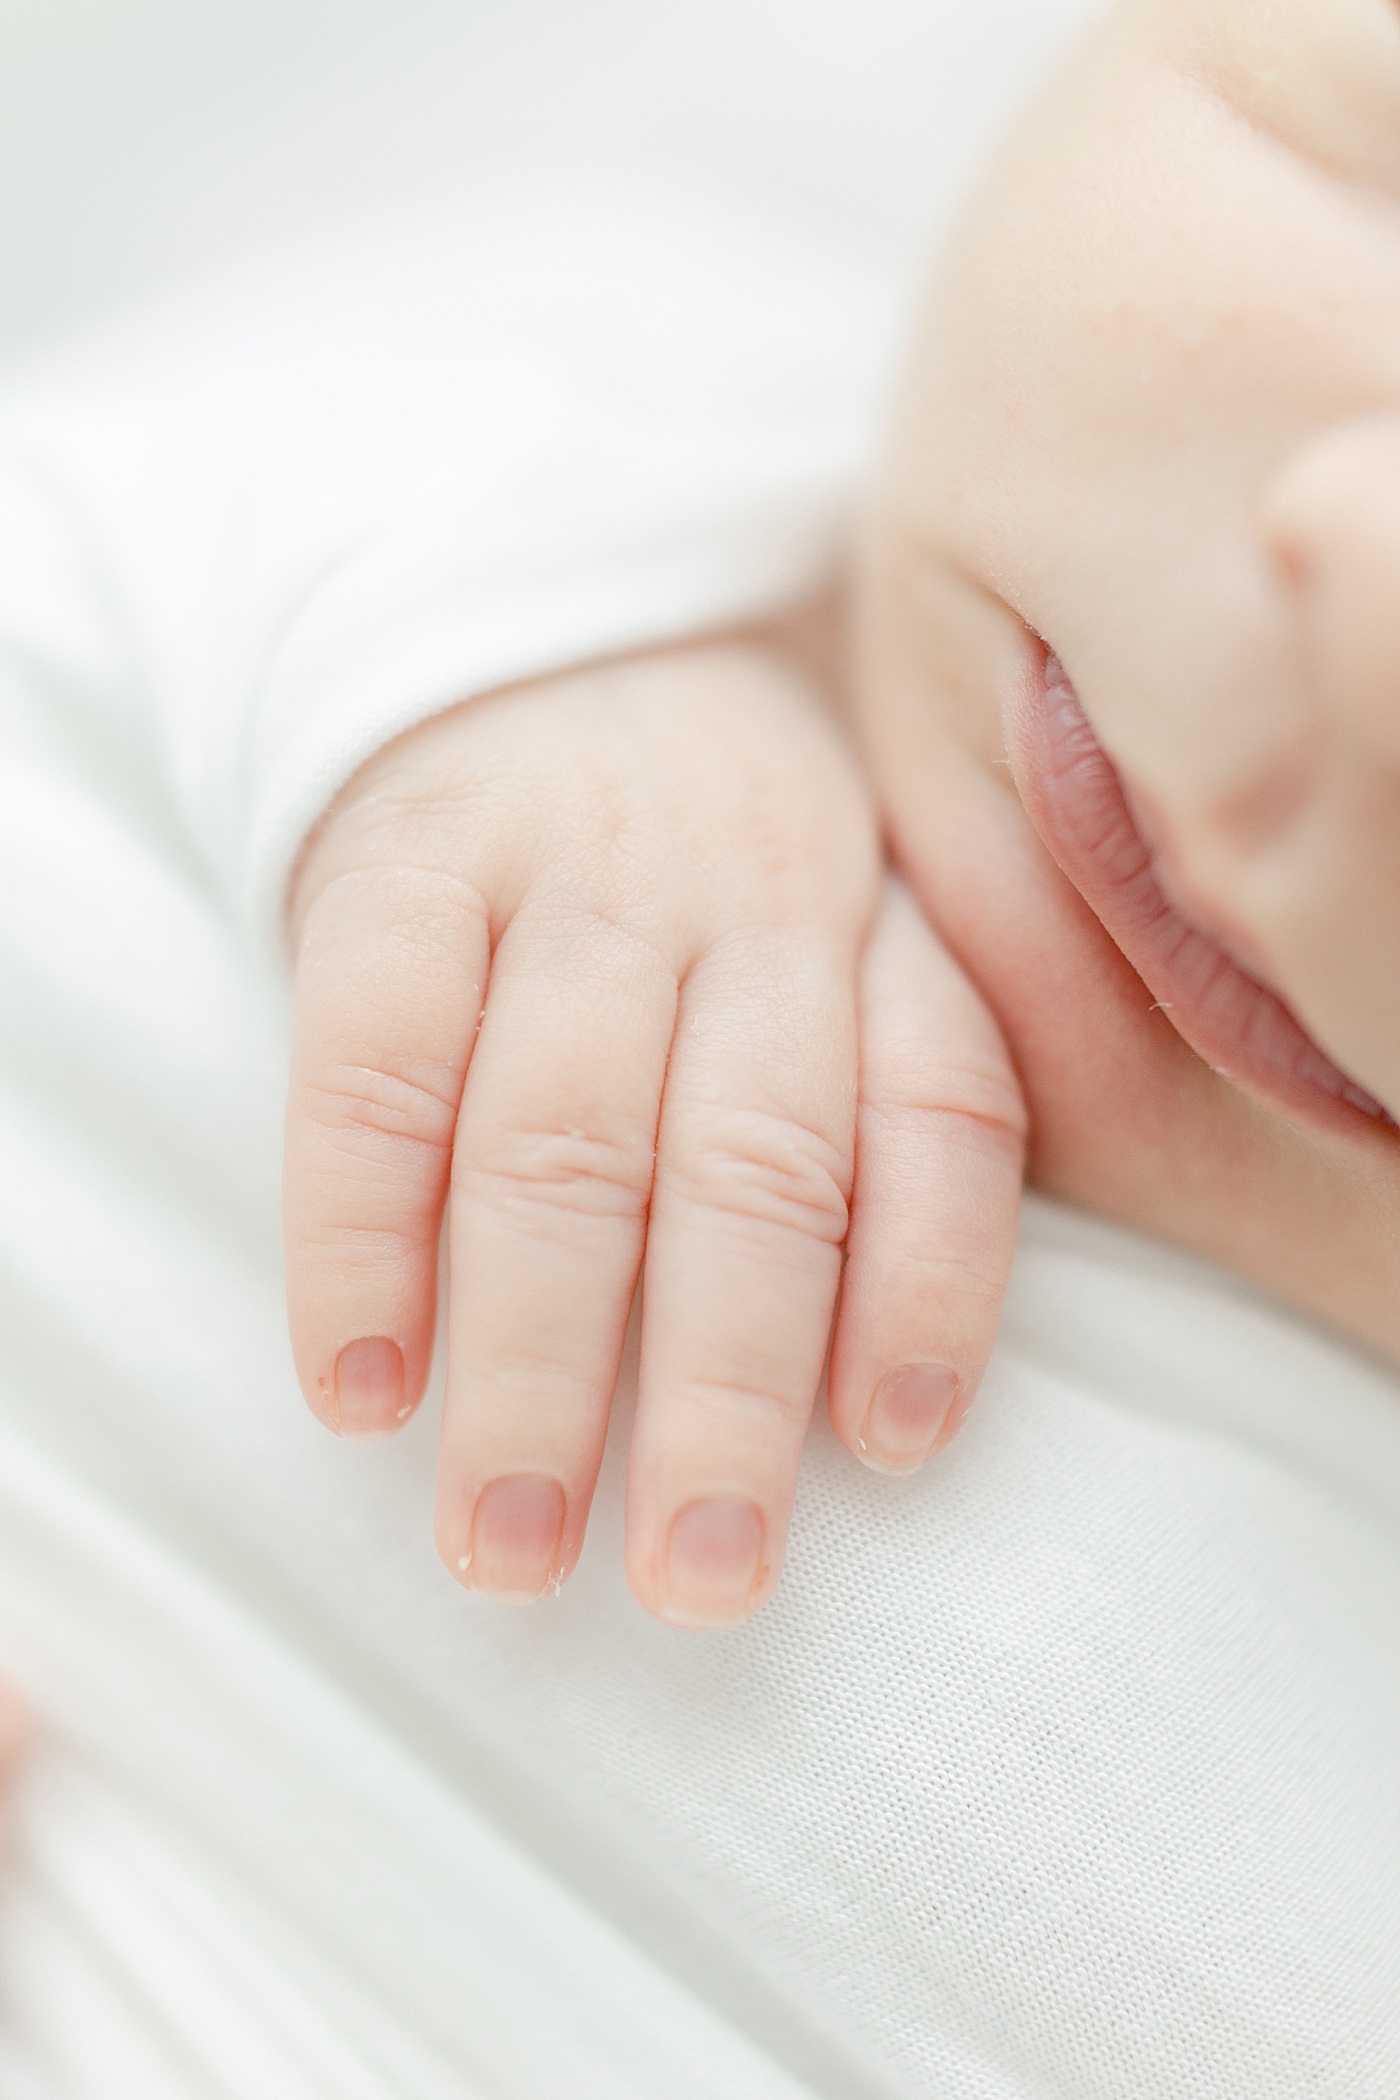 Up close details of newborn's tiny fingers | Photo by Hattiesburg NB photographer Little Sunshine Photography